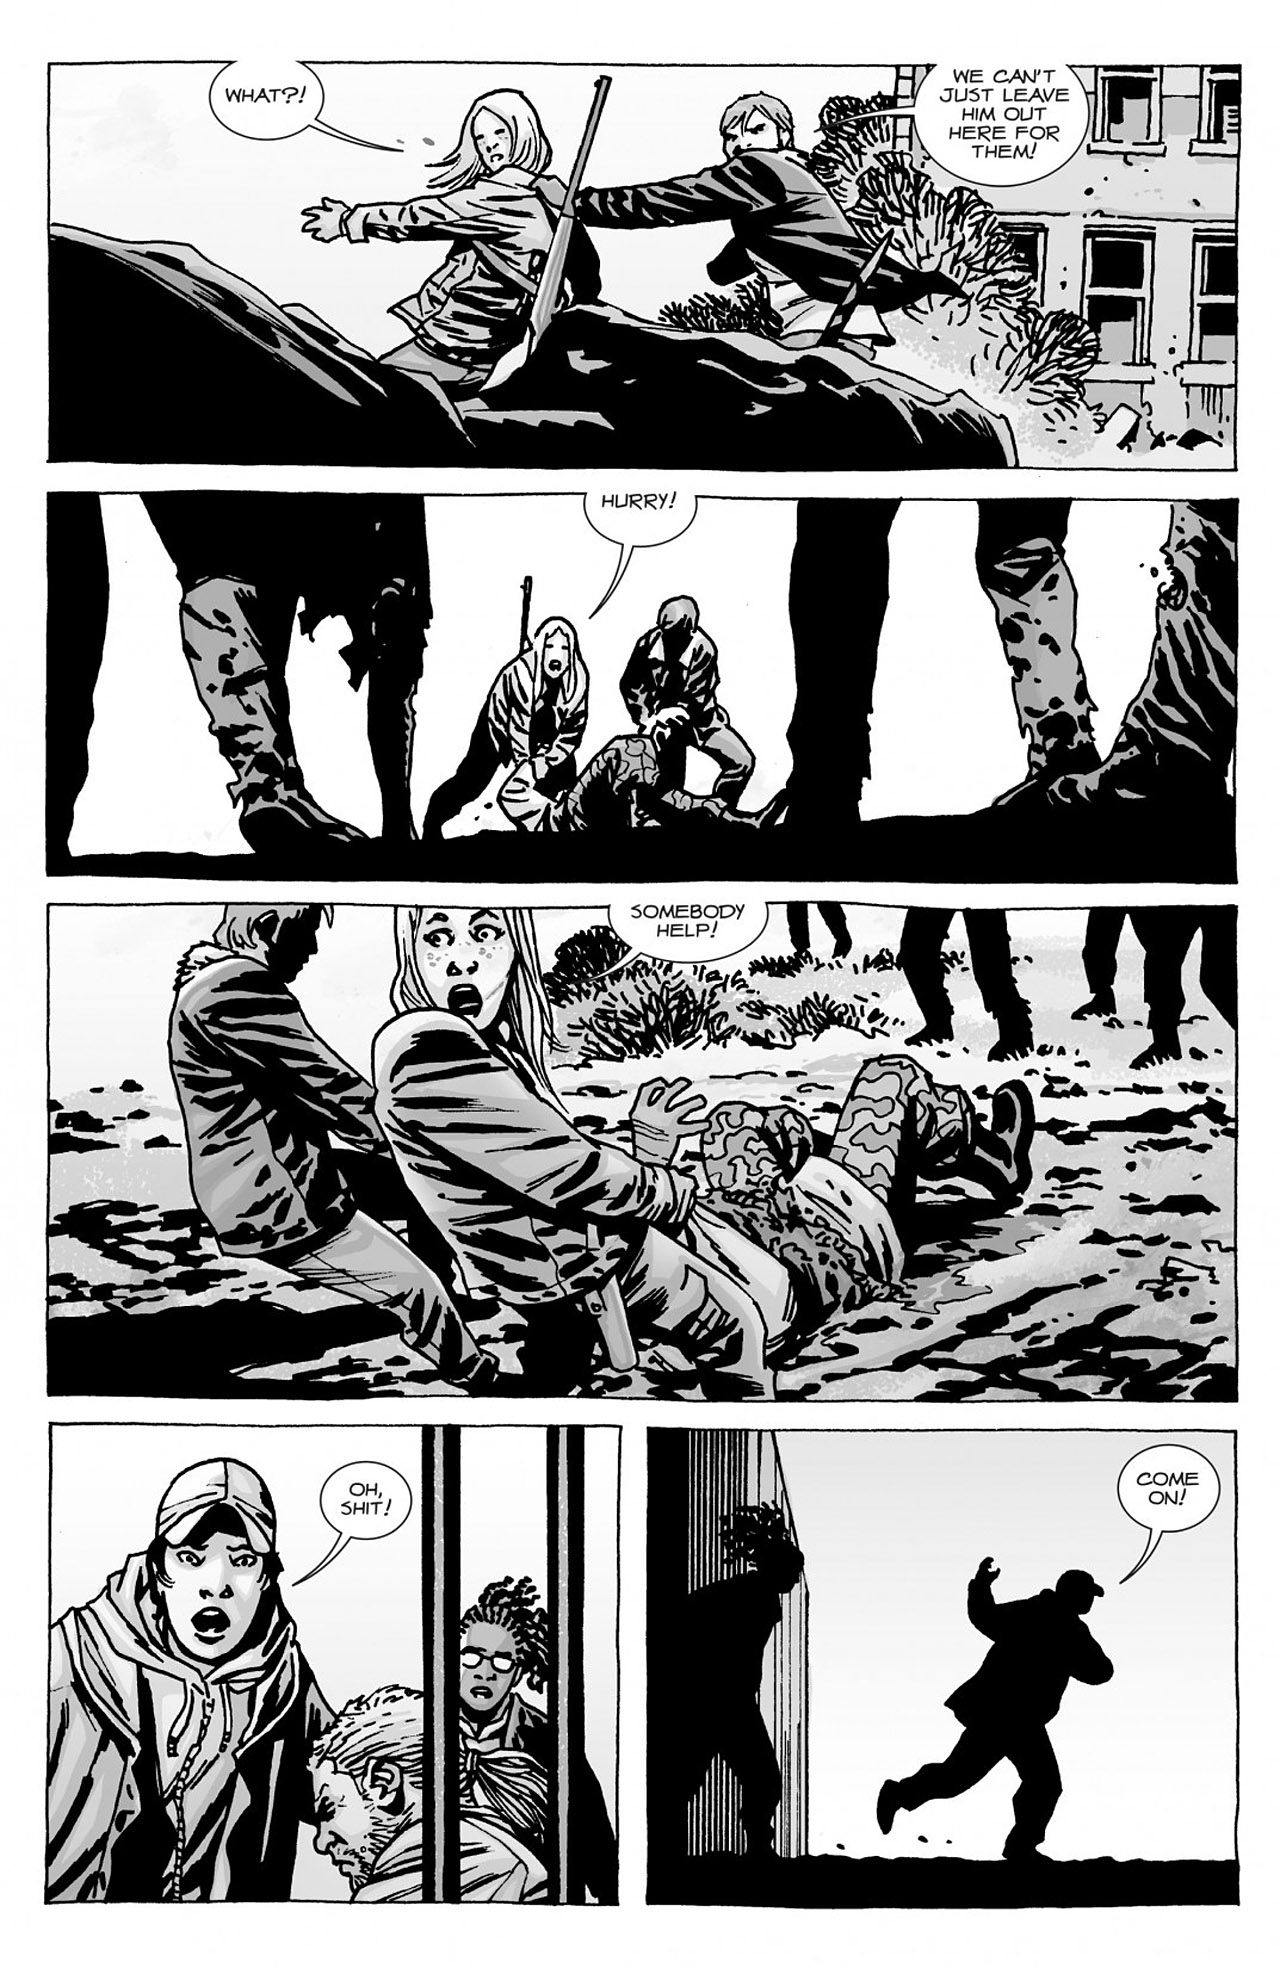 THE WALKING DEAD 98 - SOMETHING TO FEAR, Part Two